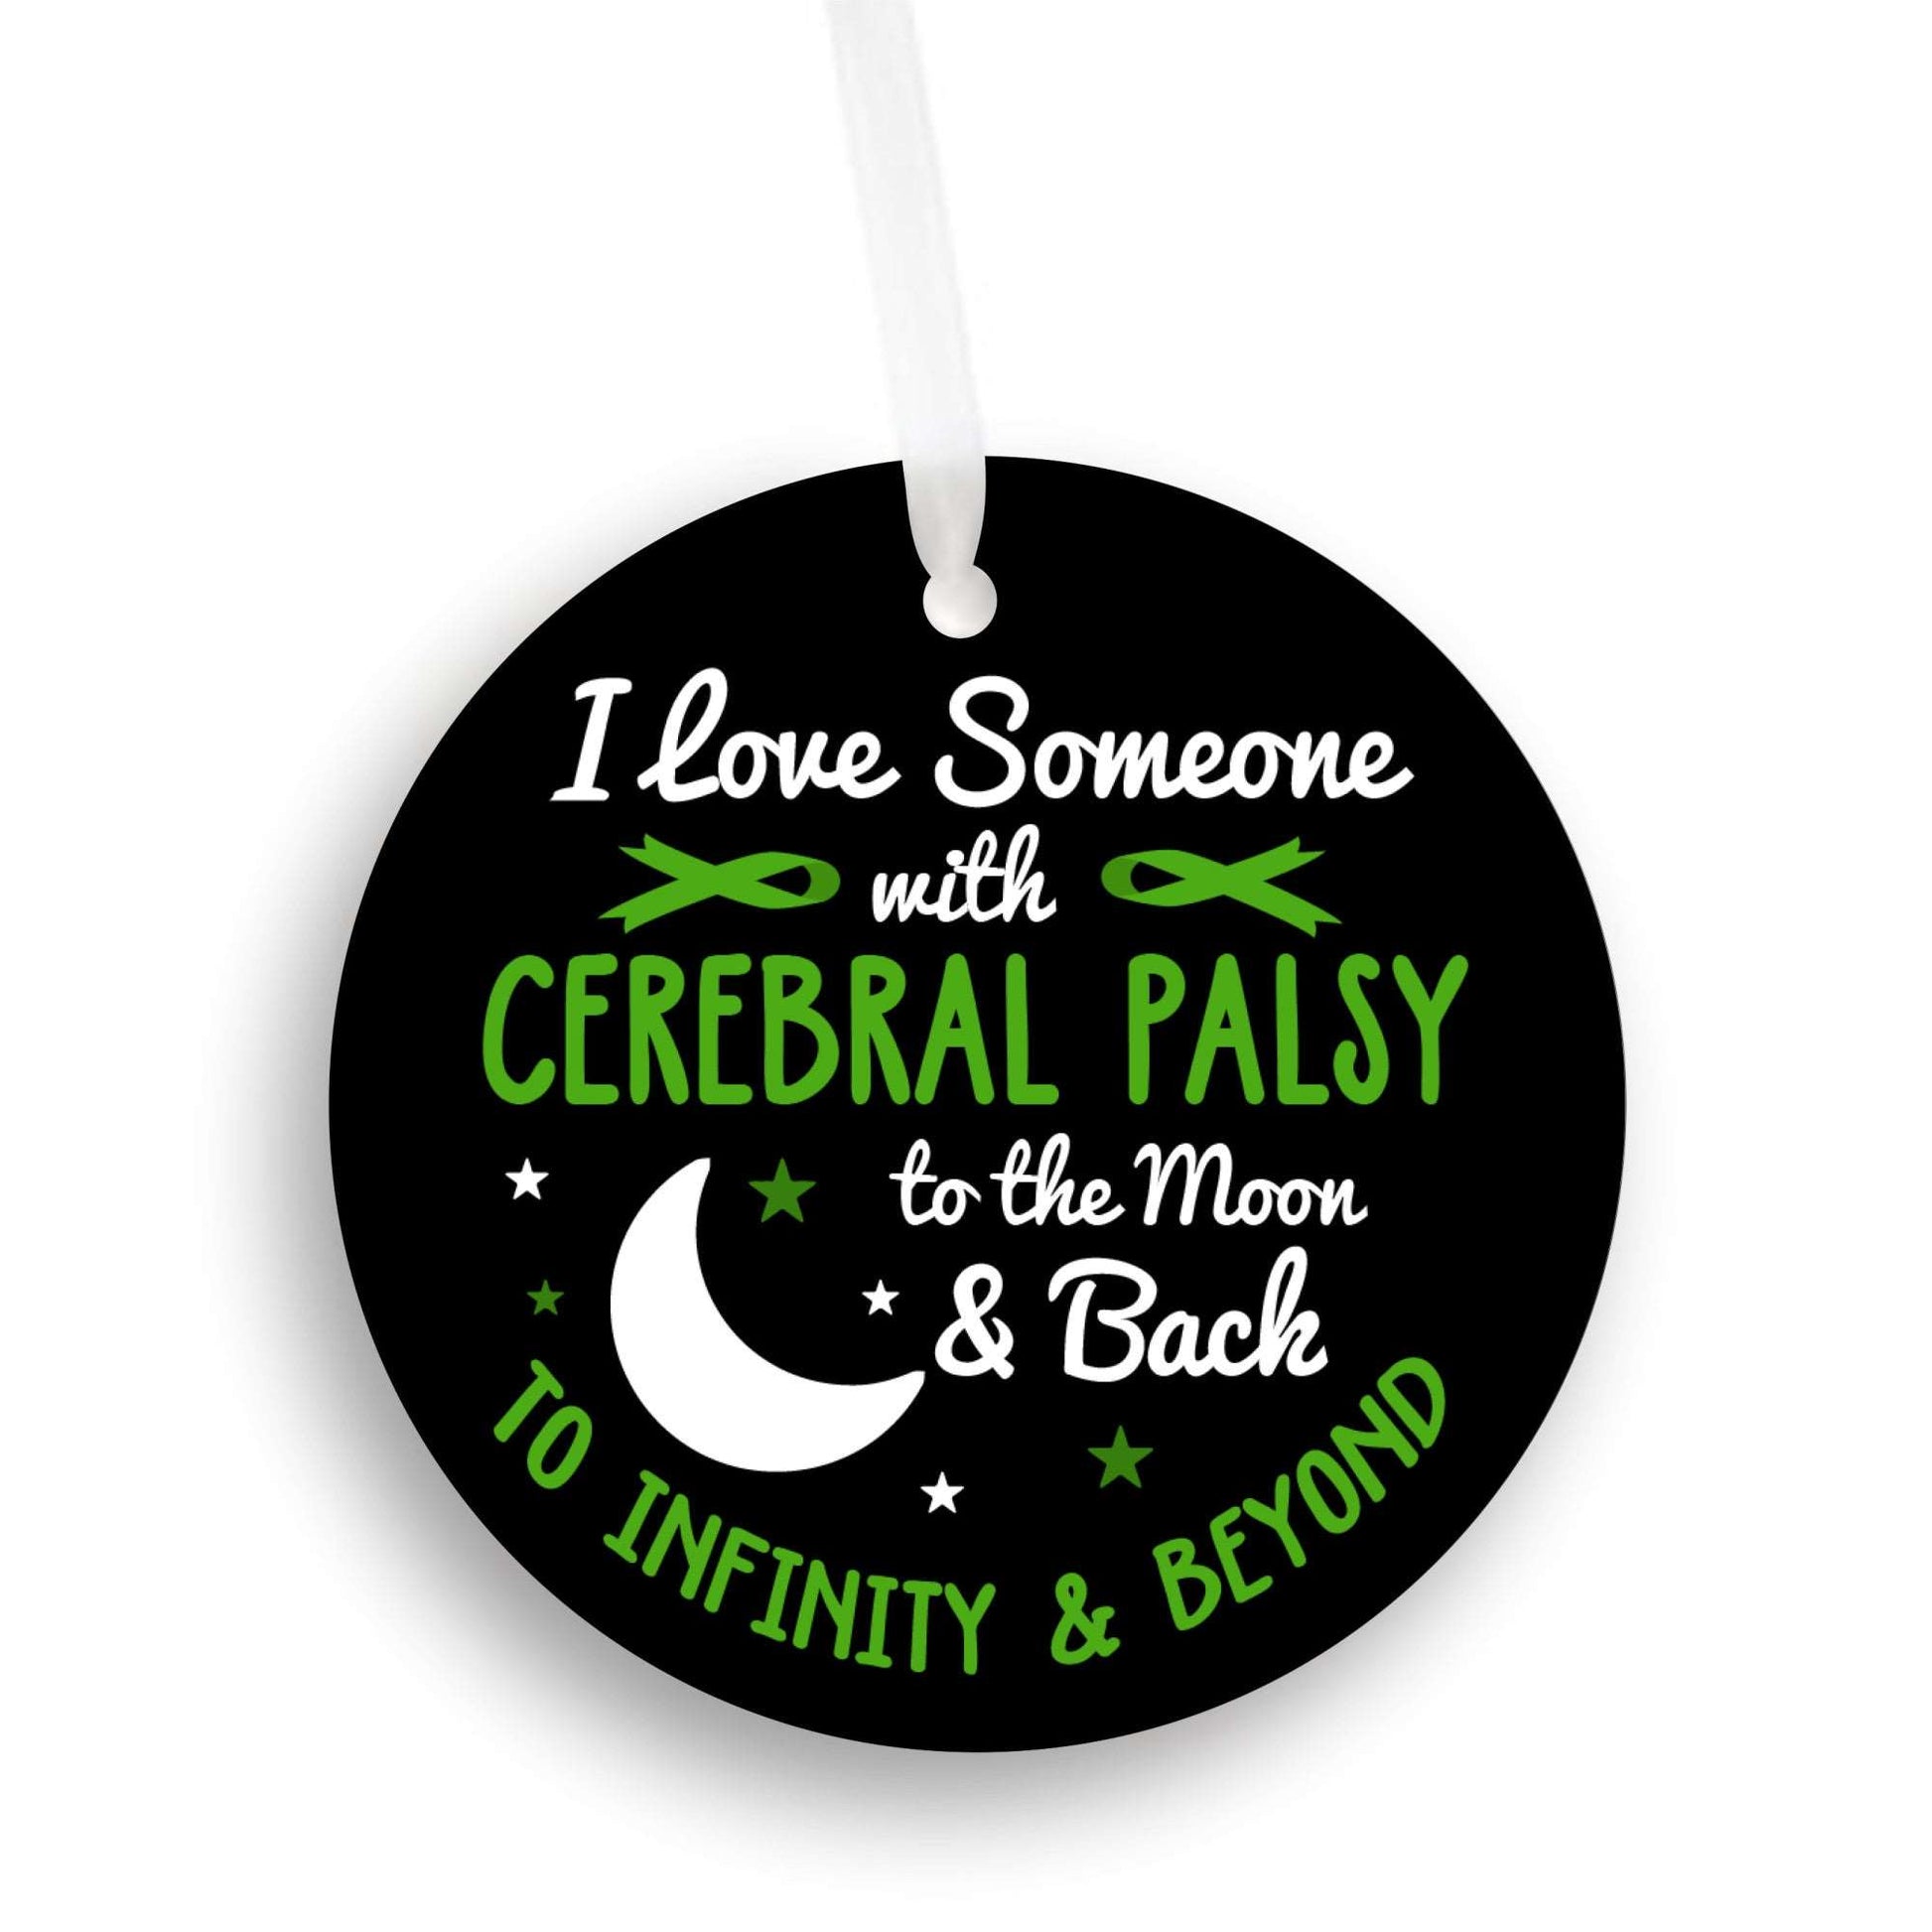 I Love Someone with Cerebral Palsy to the Moon and Back!